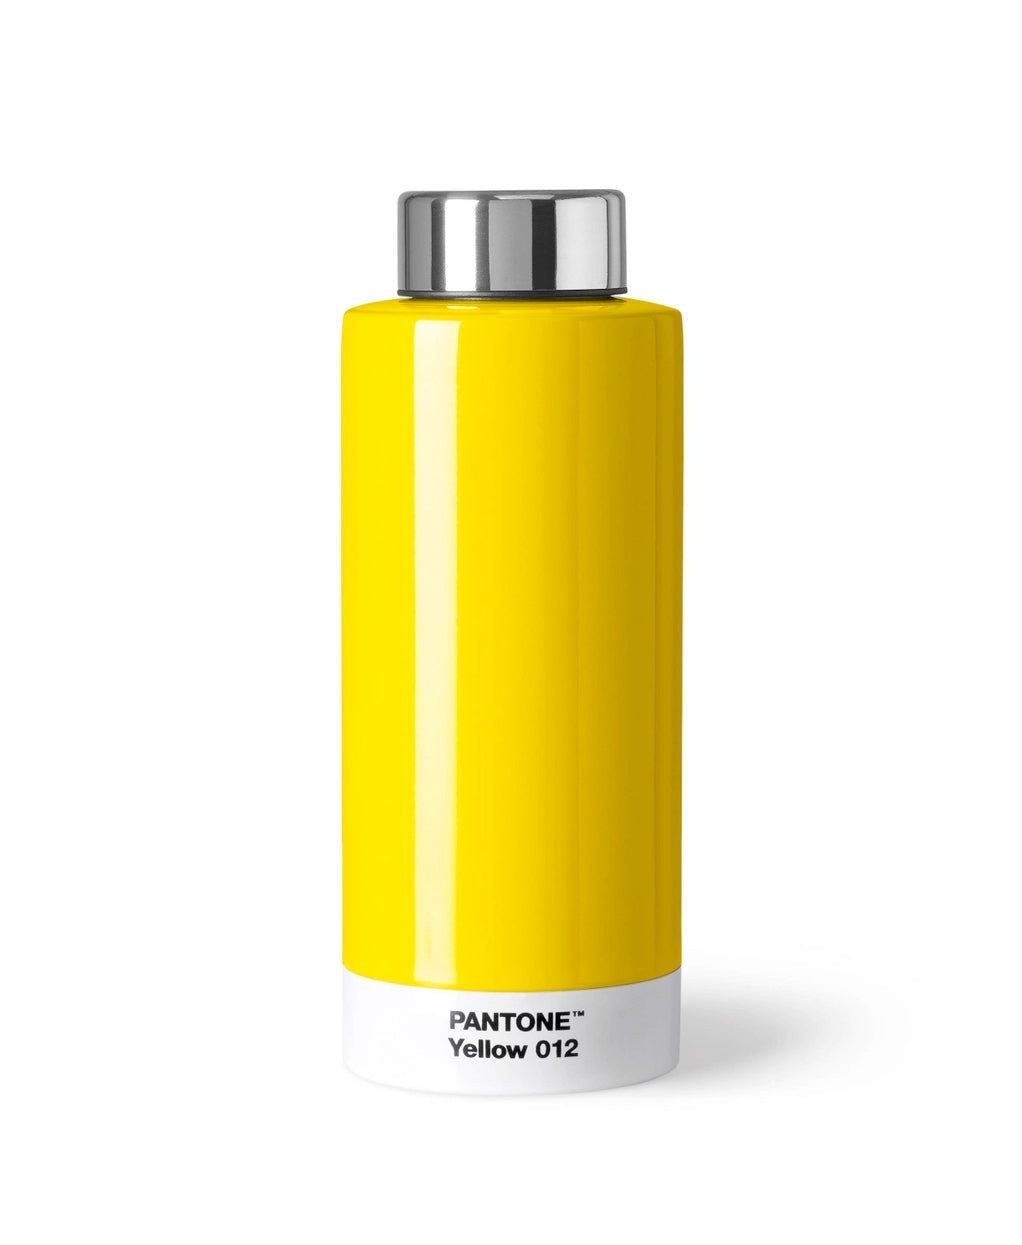 Thermo Steel Drinking Bottle